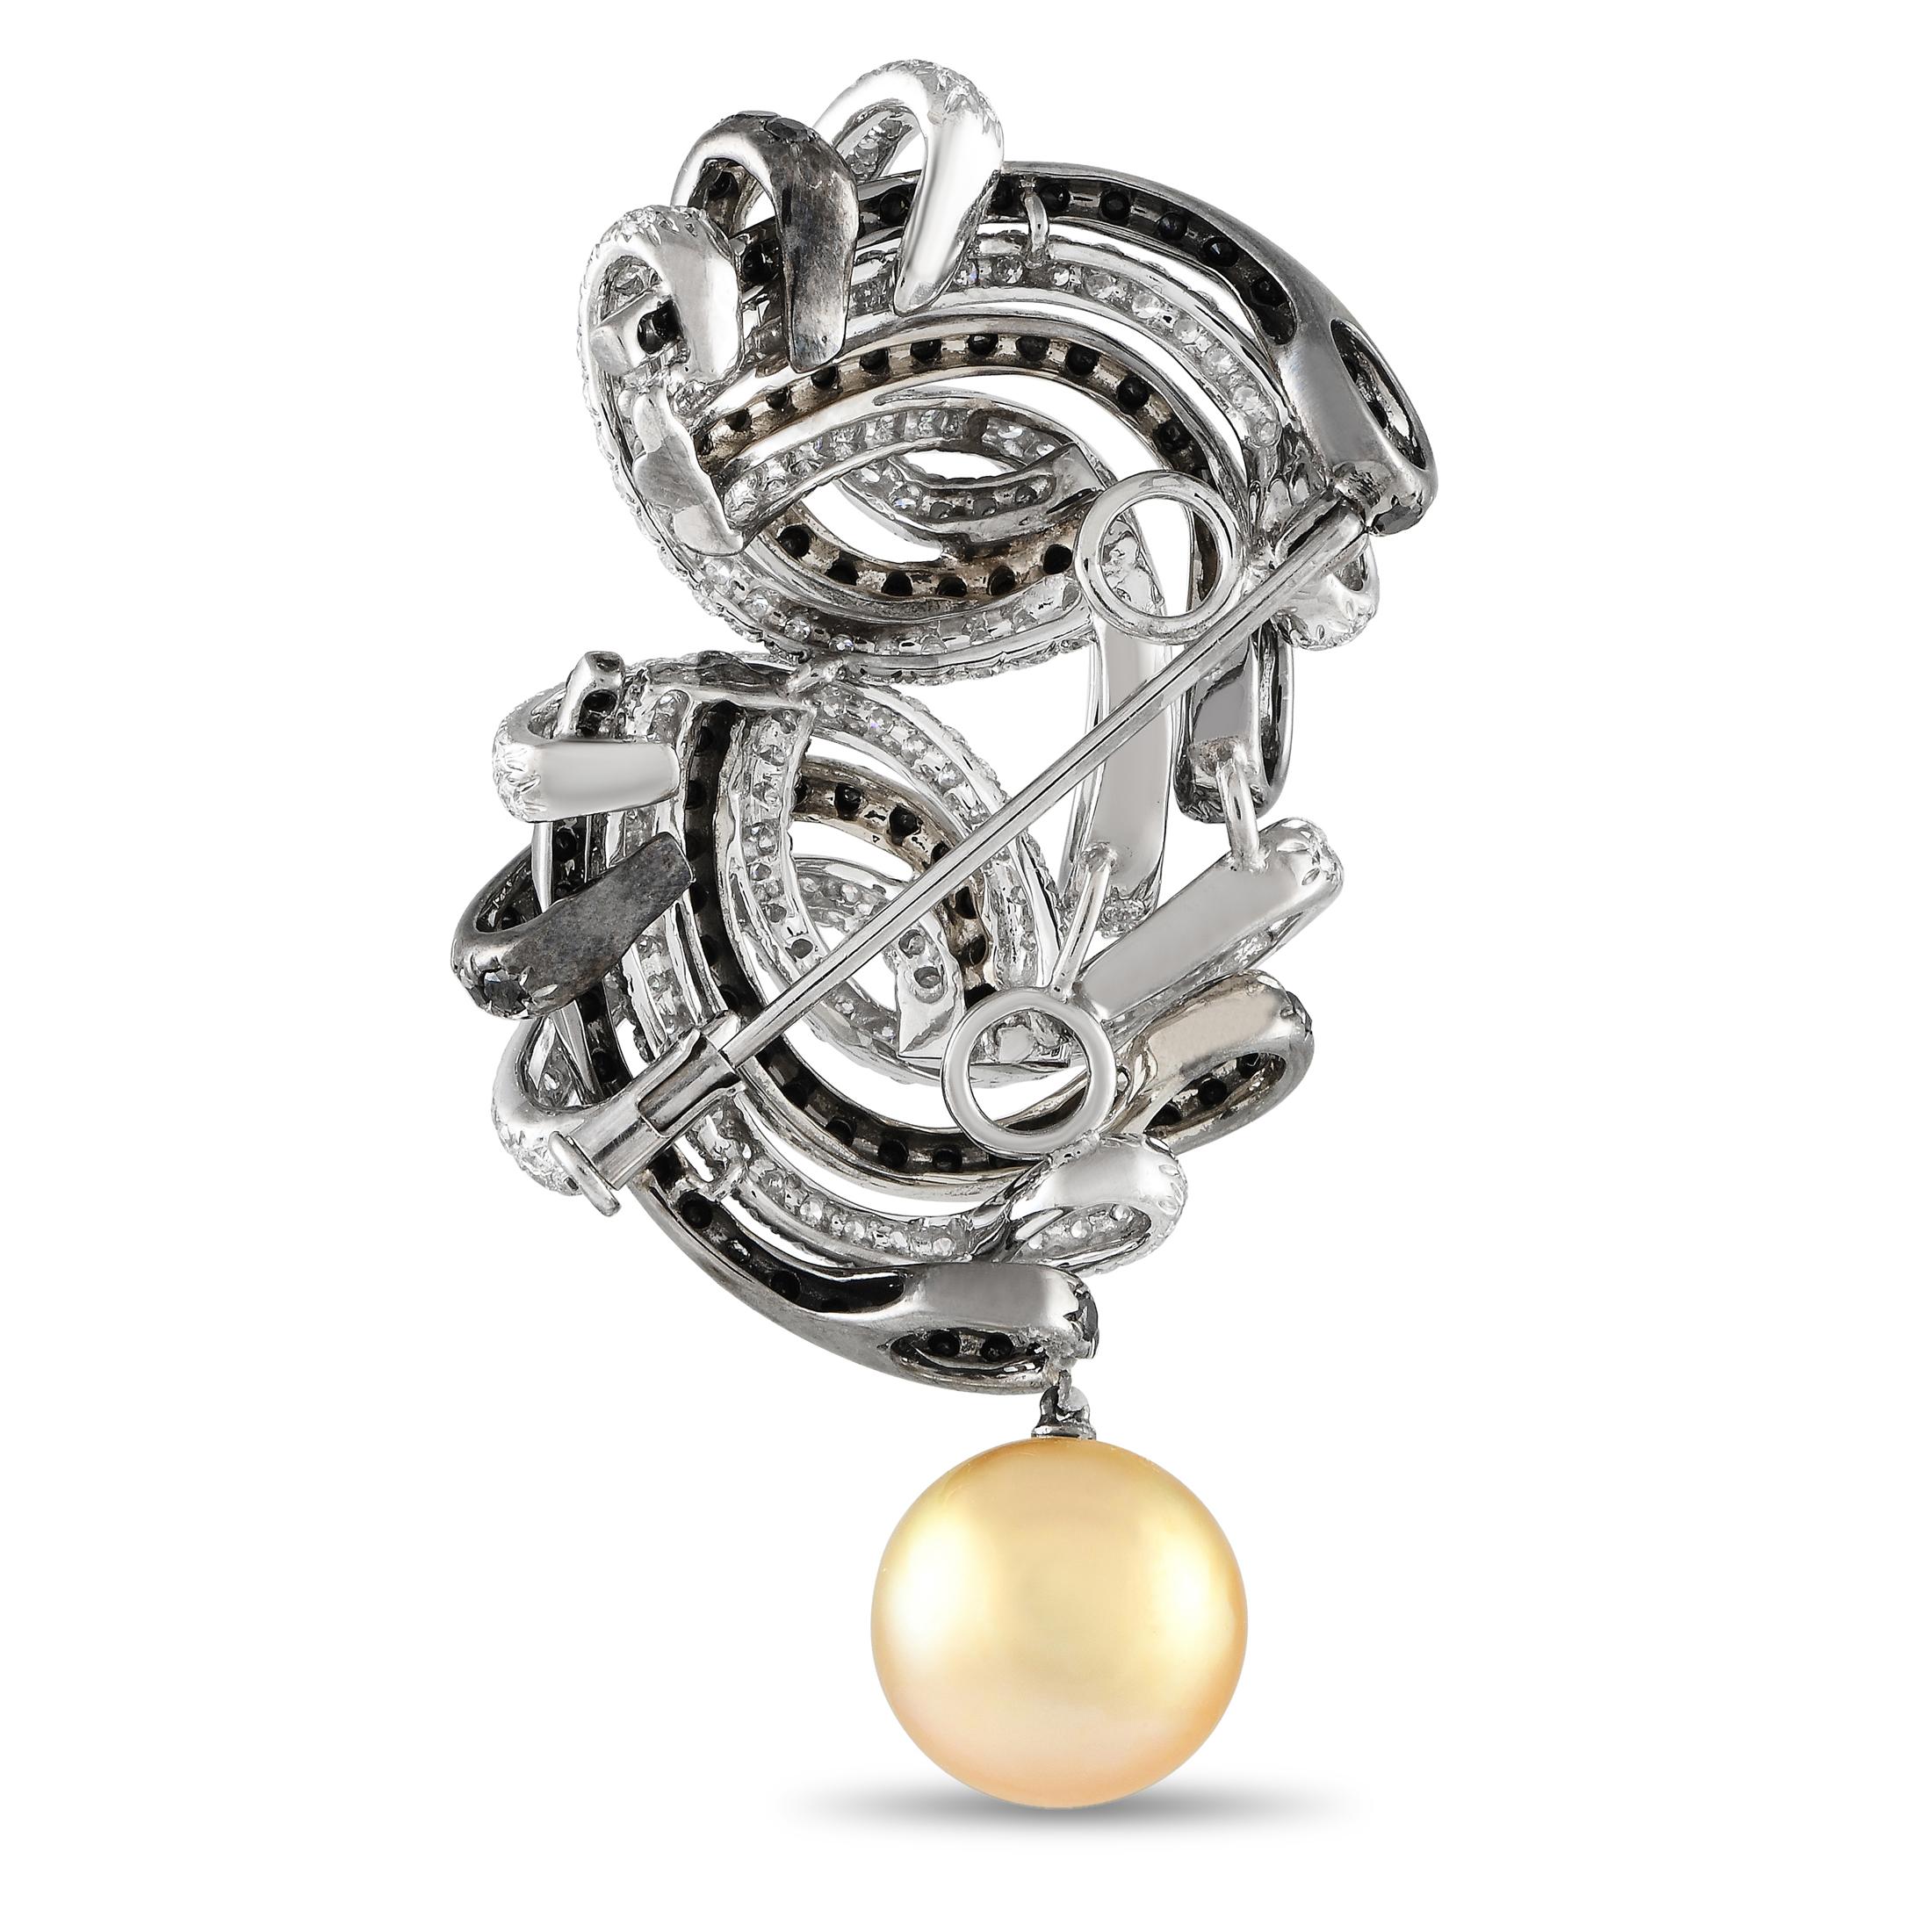 A combination of White Diamonds totaling 2.75 carats and Black Diamonds totaling 4.0 carats create an elegant contrast on this dramatic 18K White Gold brooch. At the bottom of the design, a singular 12mm Golden Pearl provides the perfect finishing